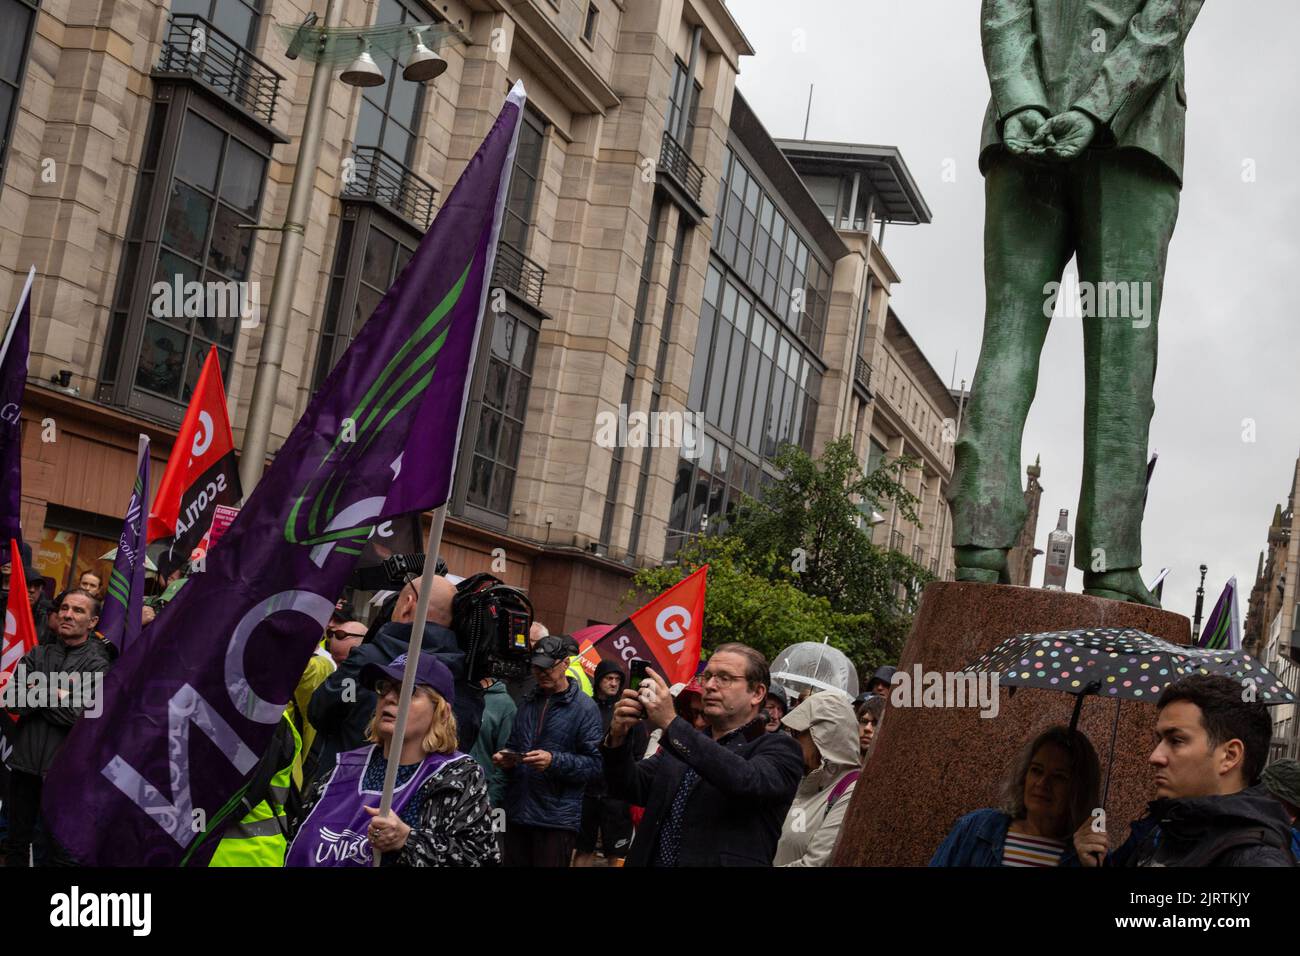 Glasgow, UK, 26 Aug 2022. Mass rally and pay protest held by trade union members, including members of GMB, EIS, RMT and more, in support of striking workers across many trades, in Glasgow, Scotland, 26 August 2022. Photo credit: Jeremy Sutton-Hibbert/ Alamy Live News. Stock Photo